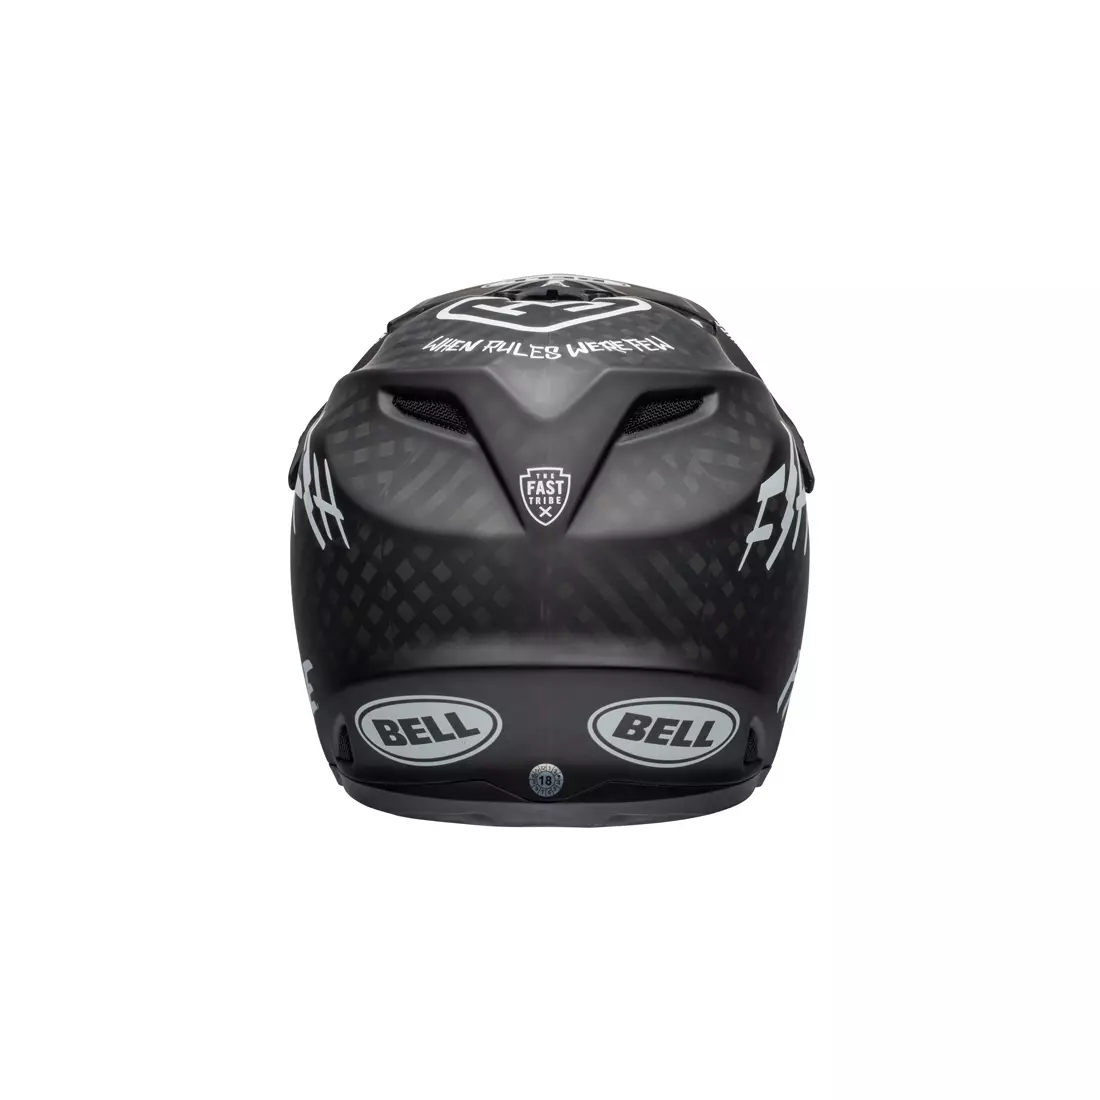 BELL kask rowerowy full face FULL-9 CARBON fasthouse matte black white BEL-7101368